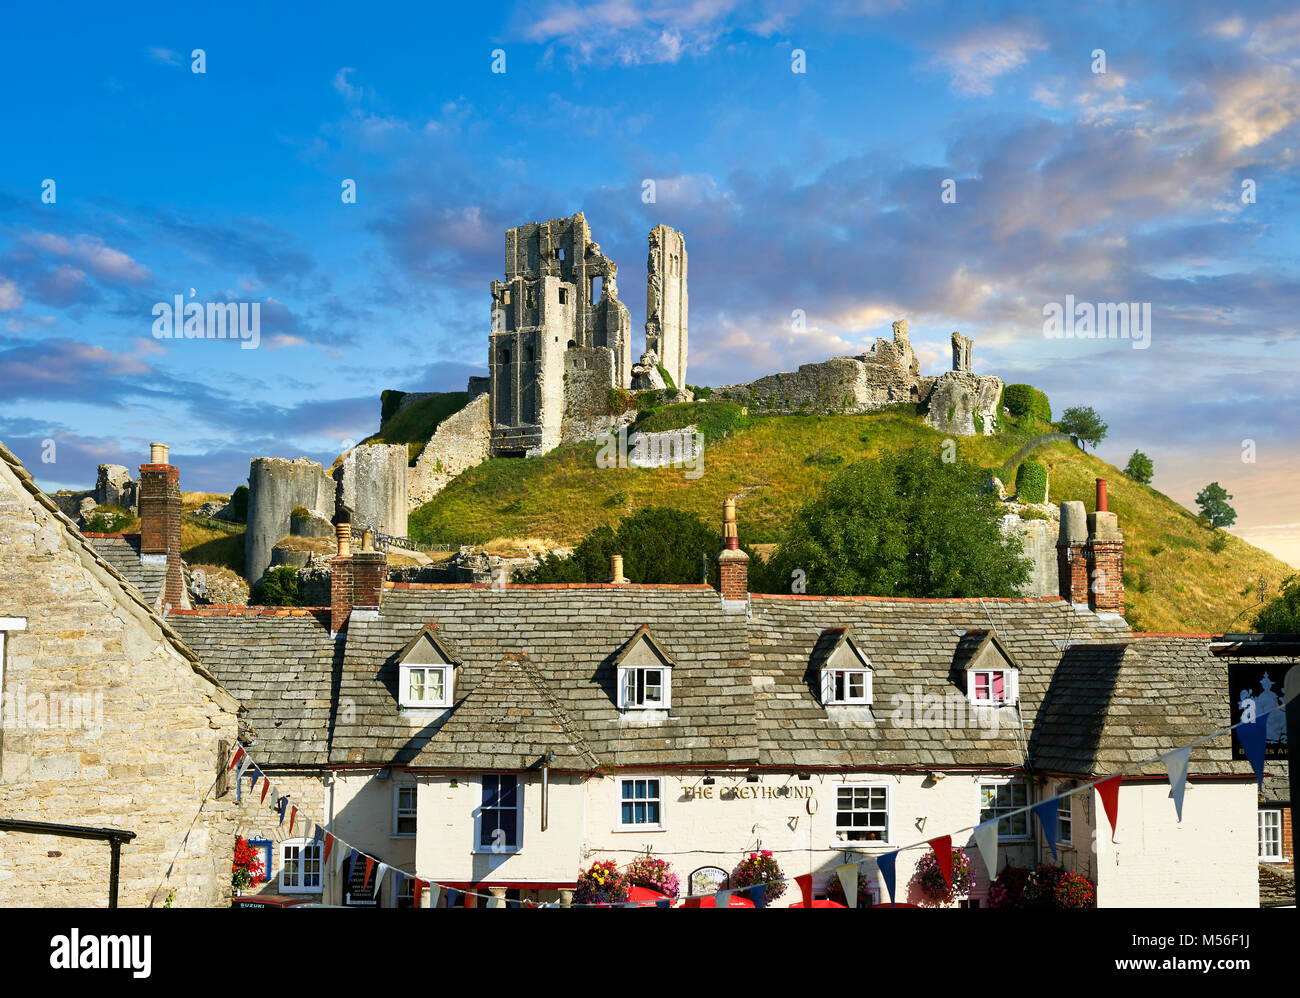 Medieval Corfe castle keep & battlements at sunrise, built in 1086 by William the Conqueror, Dorset England Stock Photo